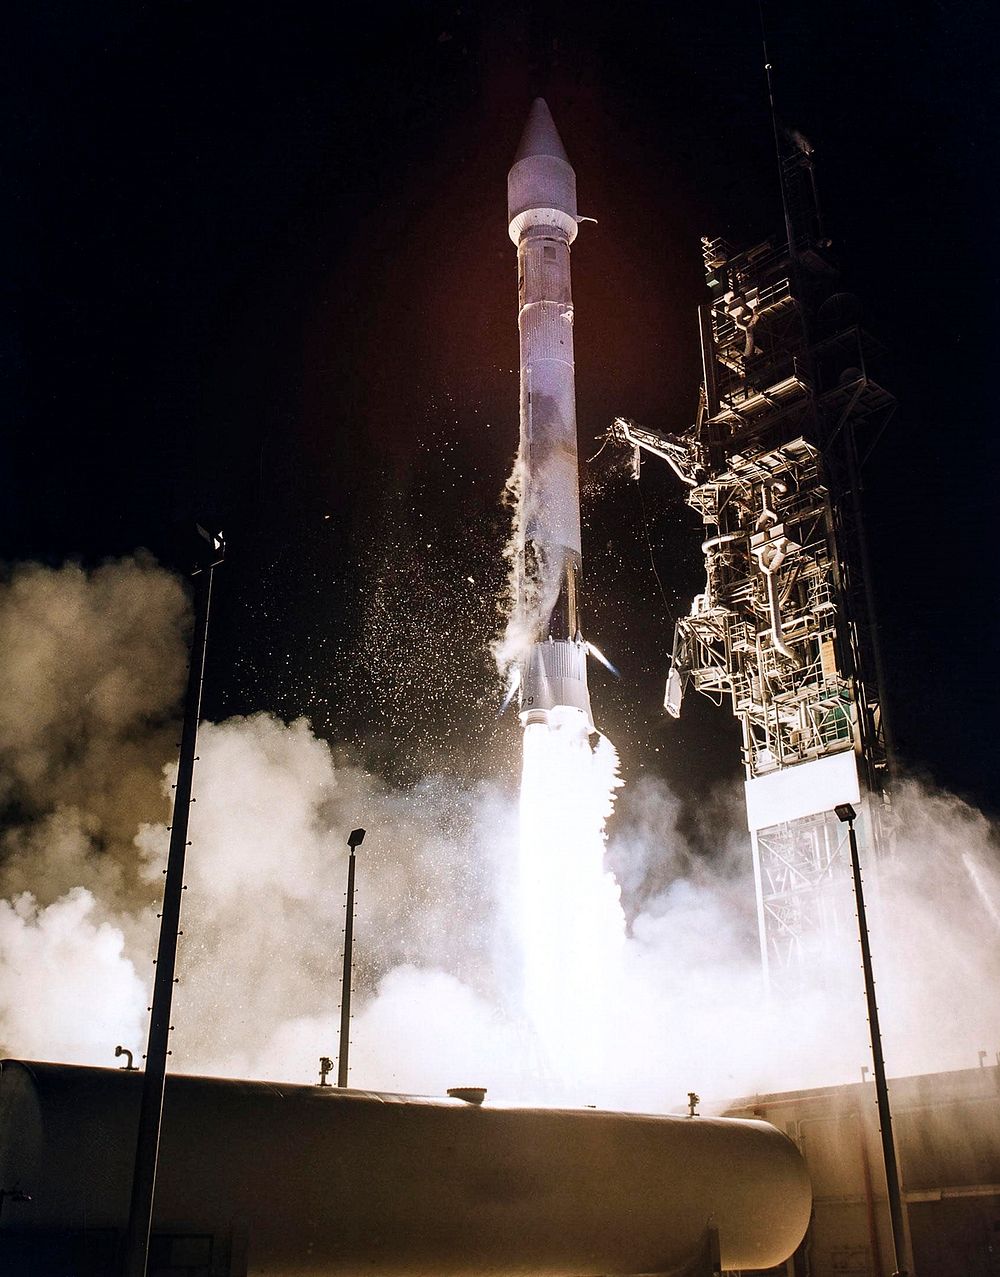 The GOES-K weather satellite lifts off from Launch Pad 36B at Cape Canaveral Air Station on an Atlas 1 rocket. Original from…